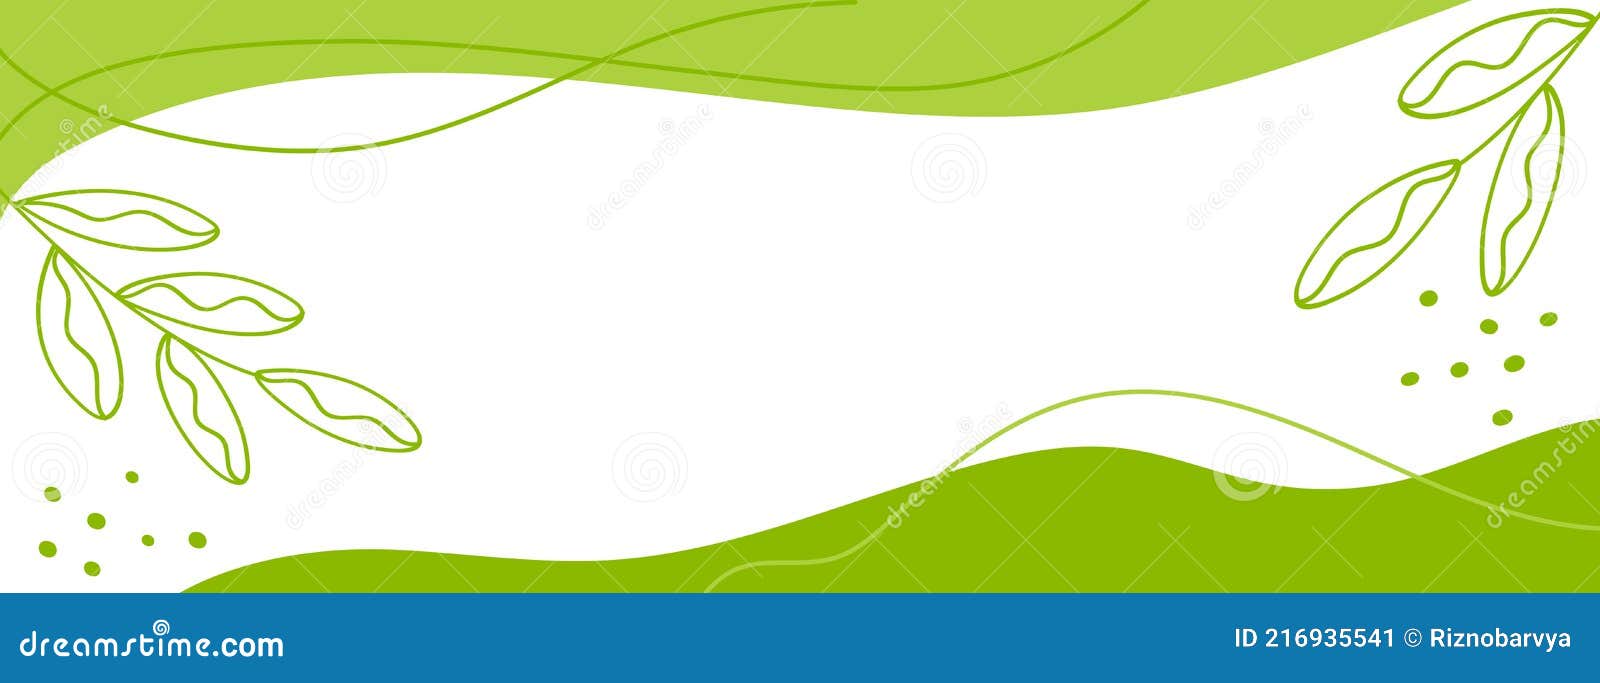 Minimalist Green Background with Abstract Shapes and Leaves ...